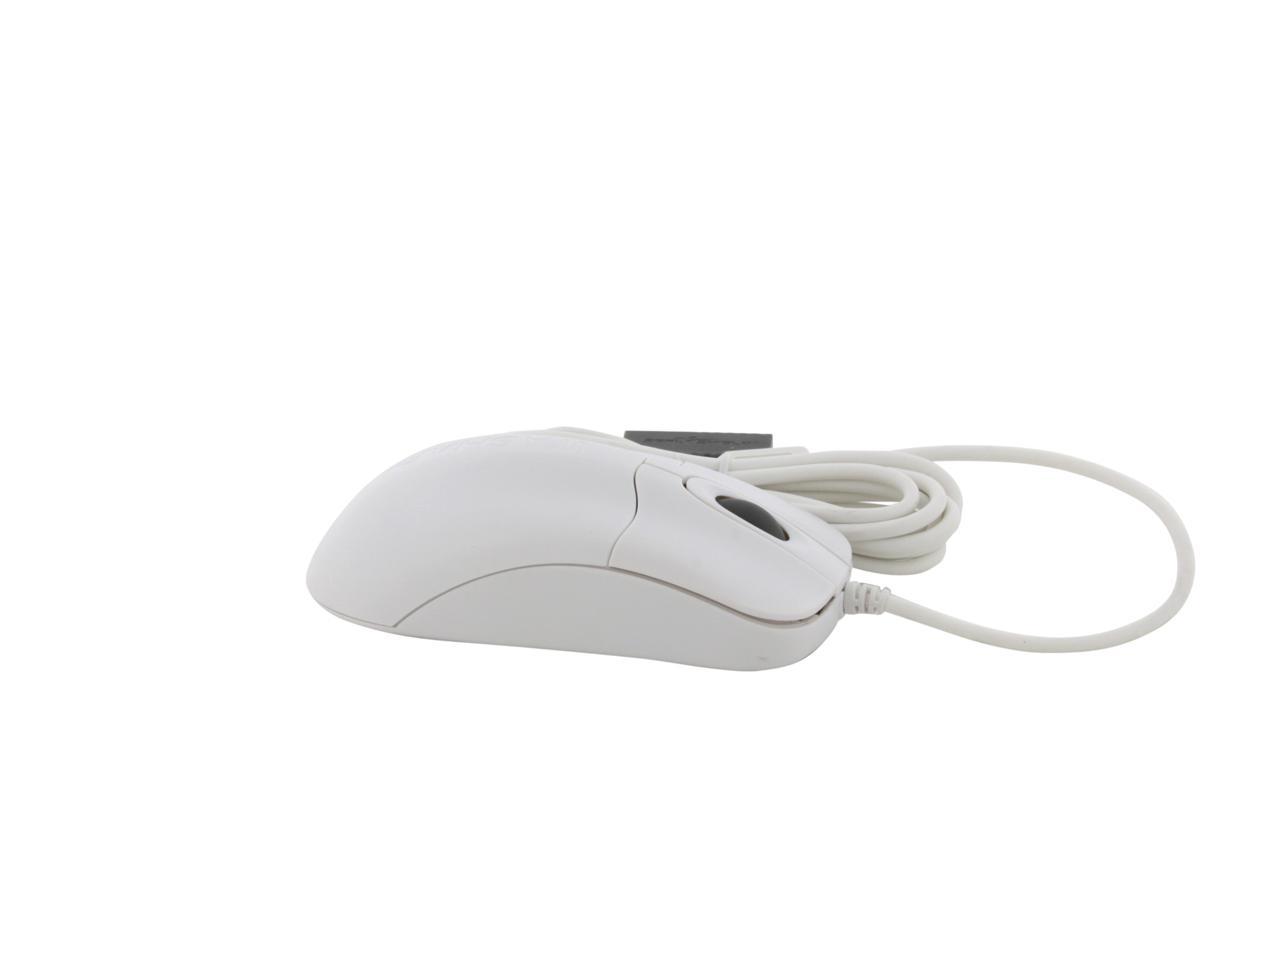 Seal Shield SILVER STORM Optical Mouse Antimicrobial & Washable STWM042 WHITE 